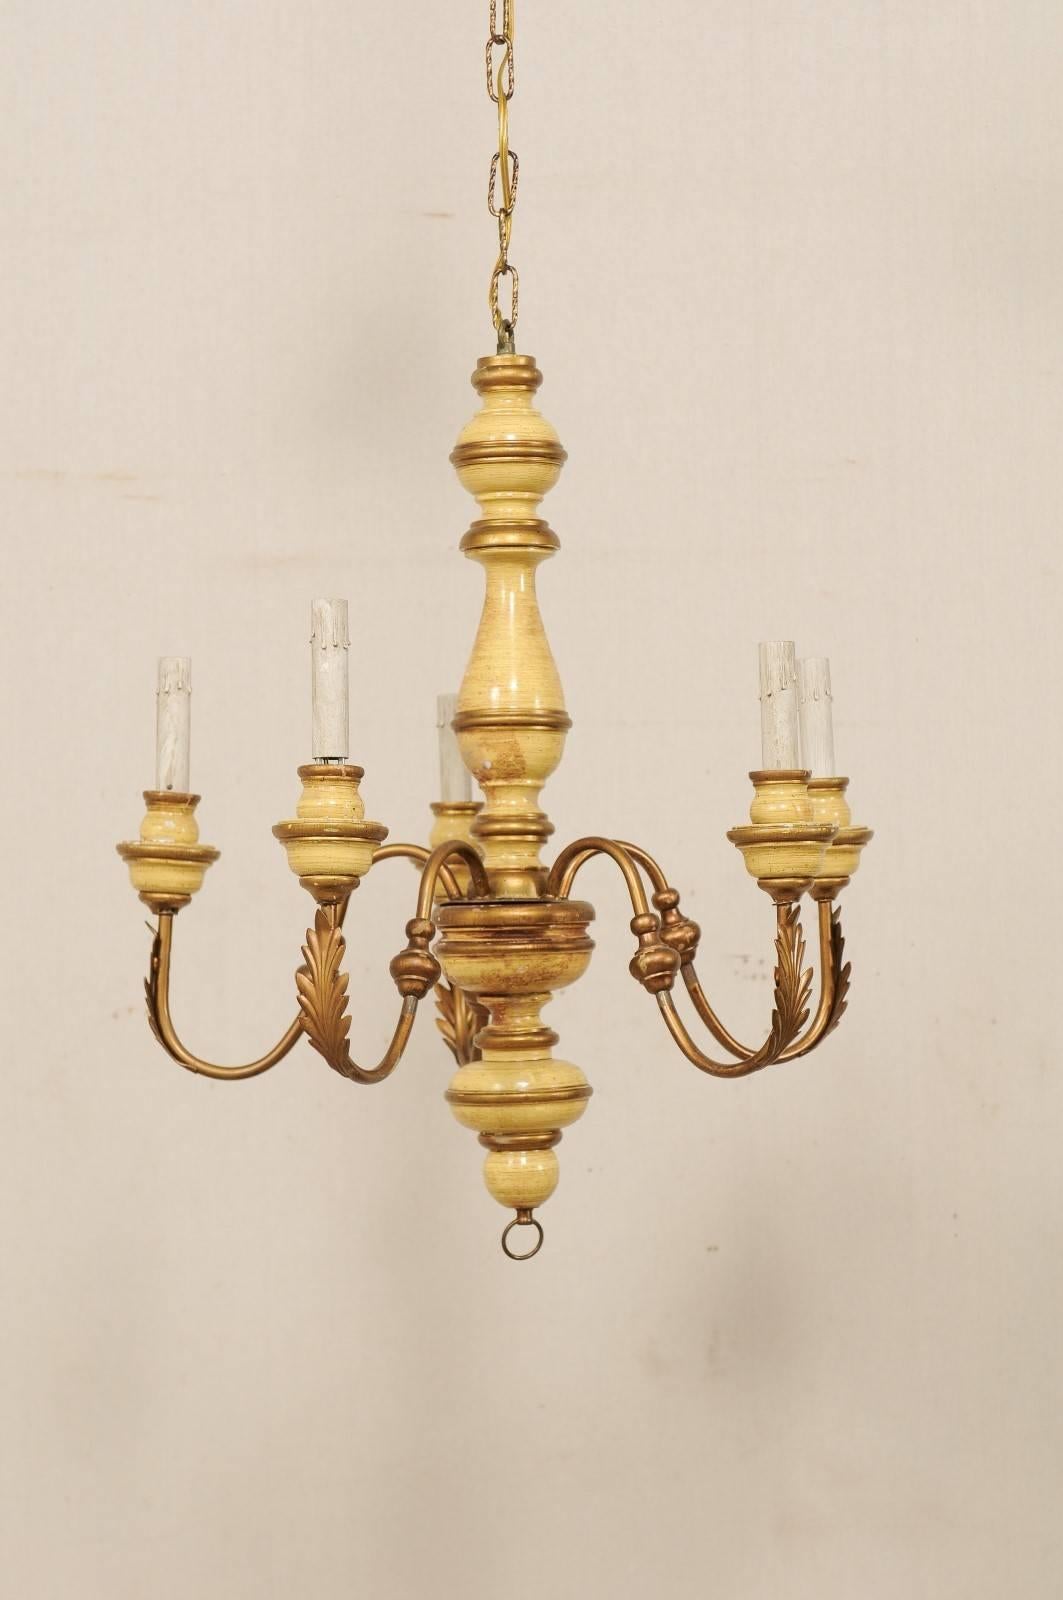 A French five-light painted wood and metal chandelier. This mid-20th century French chandelier features a carved wood column with fluid s-shaped swooping arms lifting up and out from its centre. This column features a serious of bulbous shapes, with